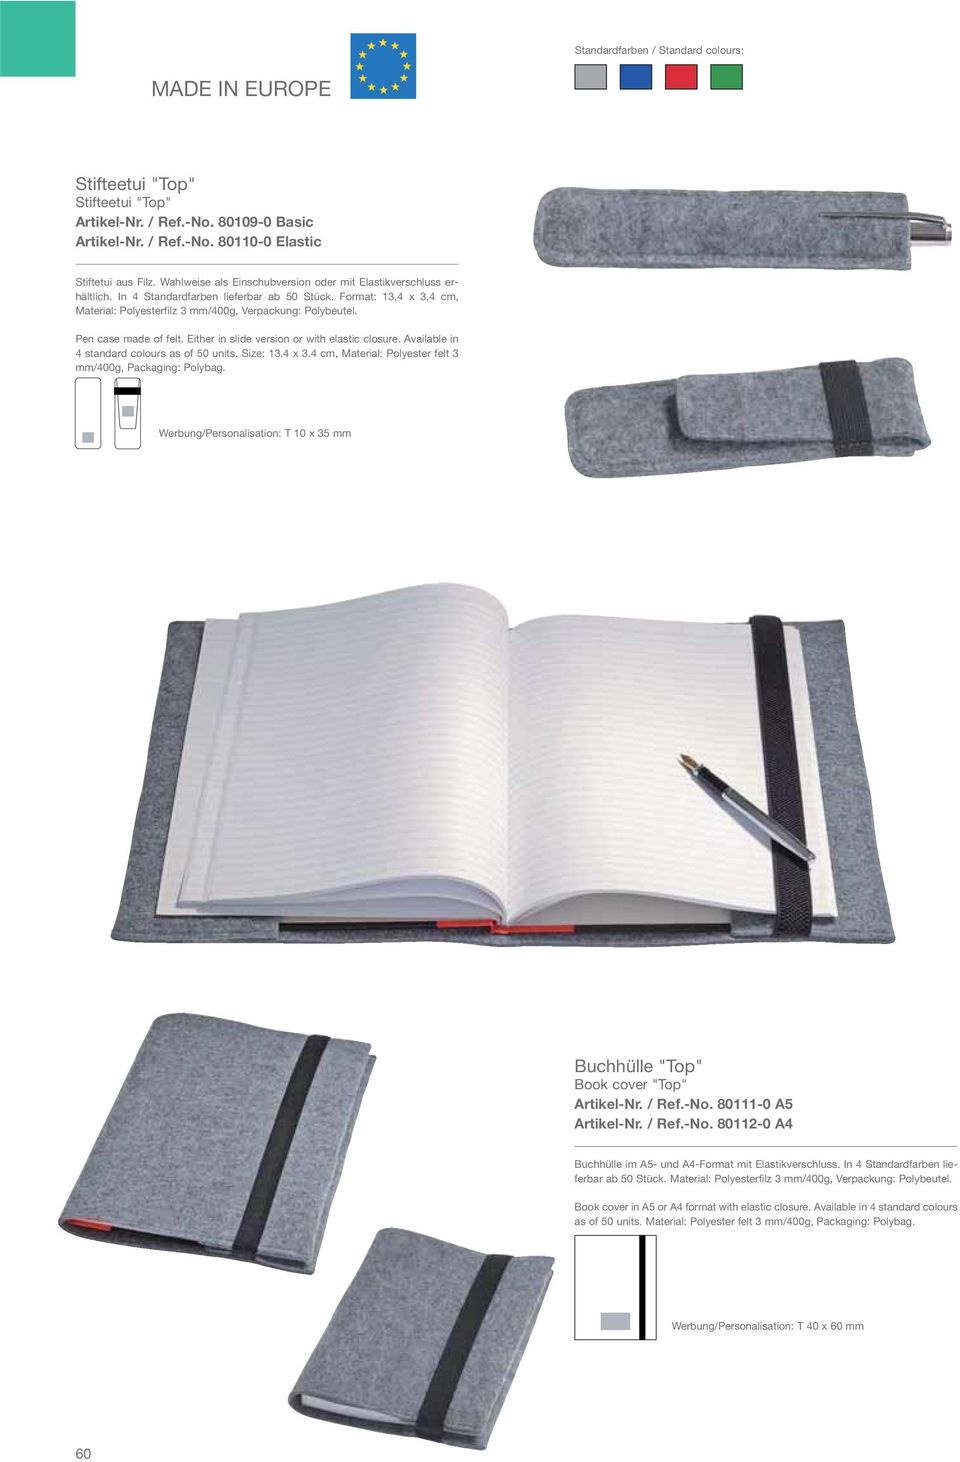 Pen case made of felt. Either in slide version or with elastic closure. Available in 4 standard colours as of 50 units. Size: 13.4 x 3.4 cm, Material: Polyester felt 3 mm/400g, Packaging: Polybag.